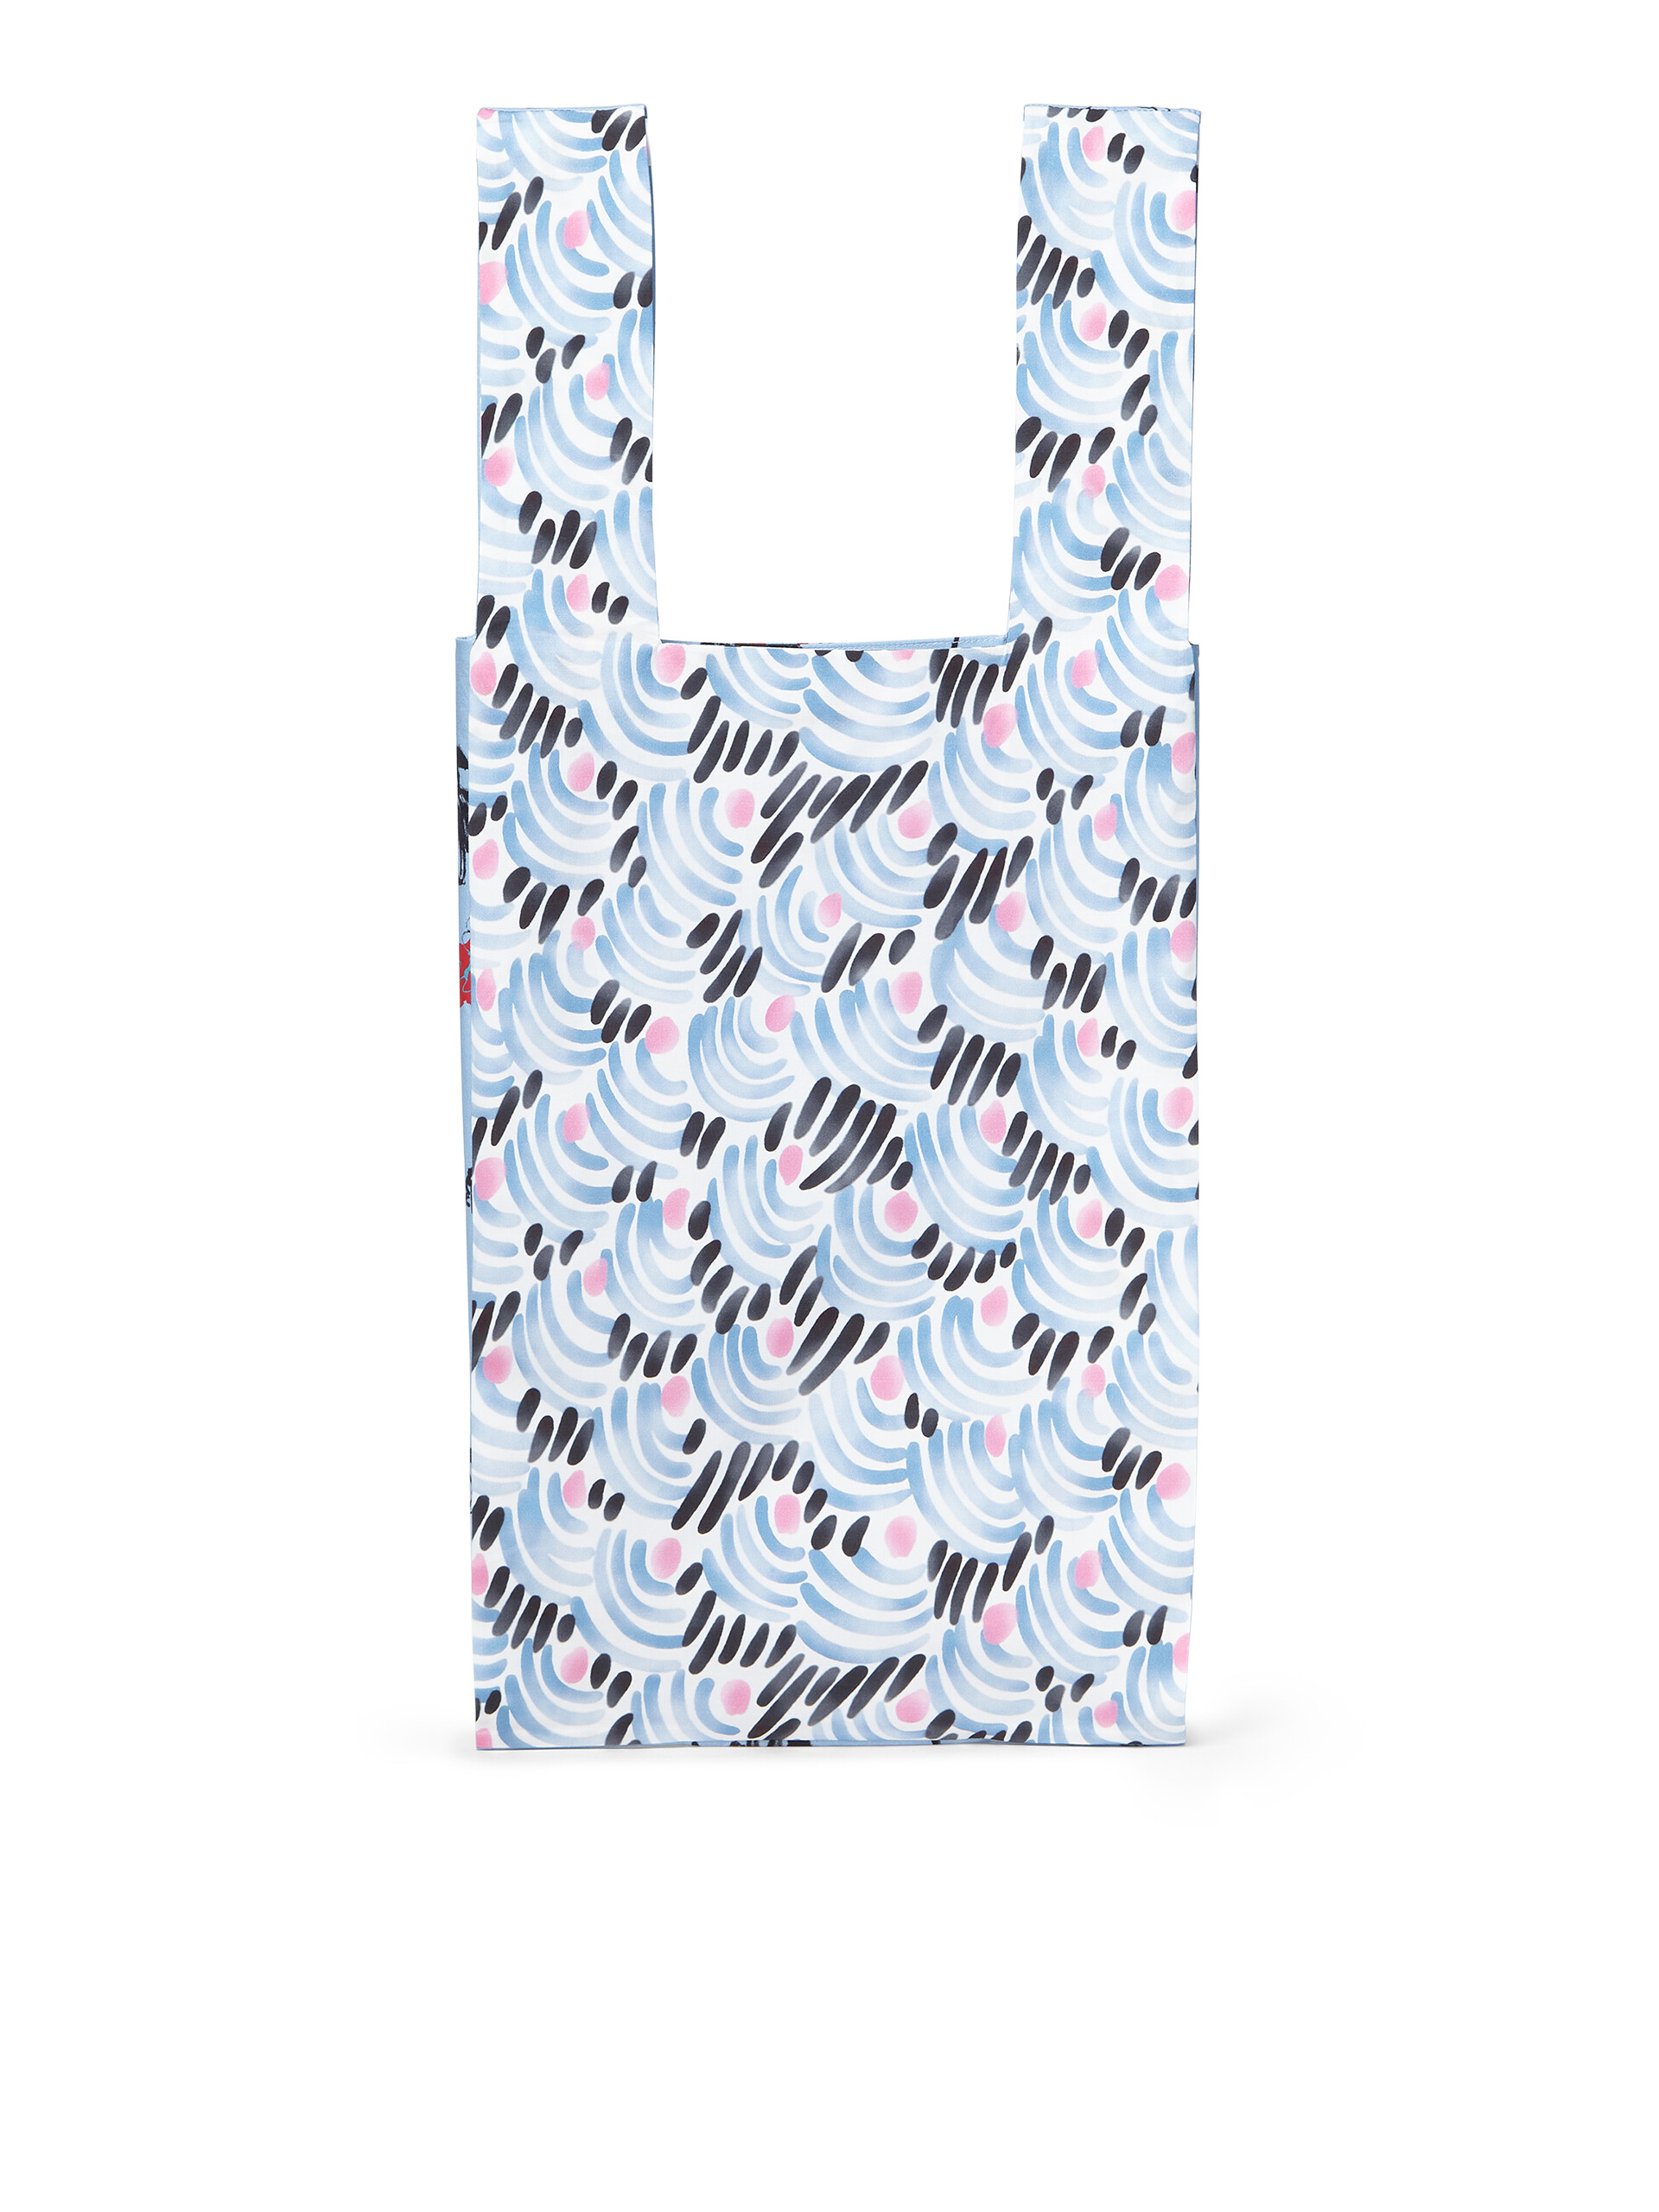 MARNI MARKET cotton shopping bag with floral and abstract print - Shopping Bags - Image 3